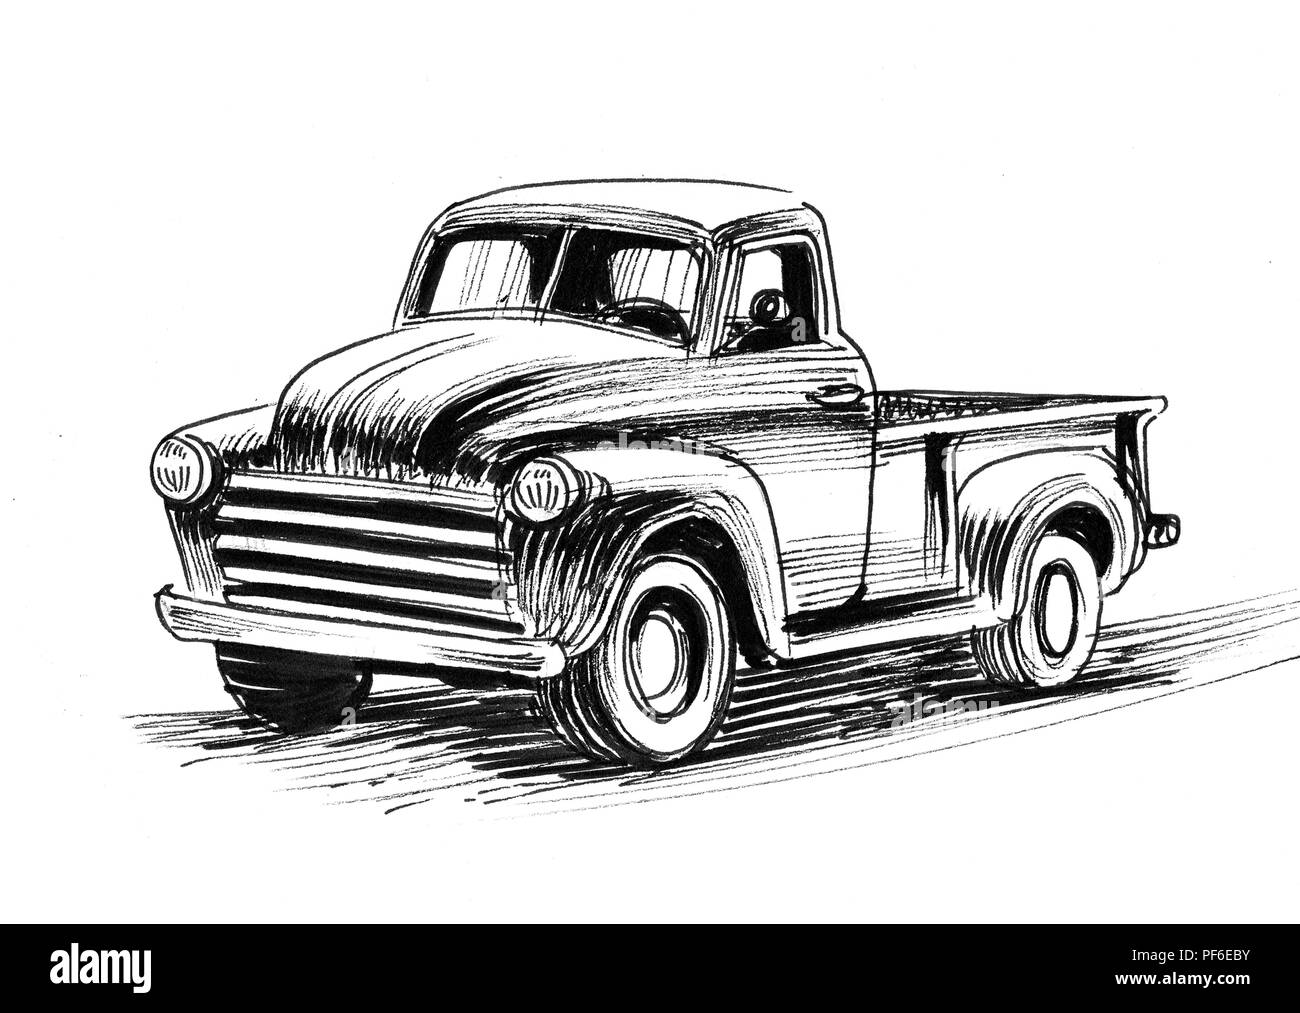 Old Trucks Coloring American Pick Up Truck Sketch Coloring Page  Truck  coloring pages Old pickup trucks Coloring pages